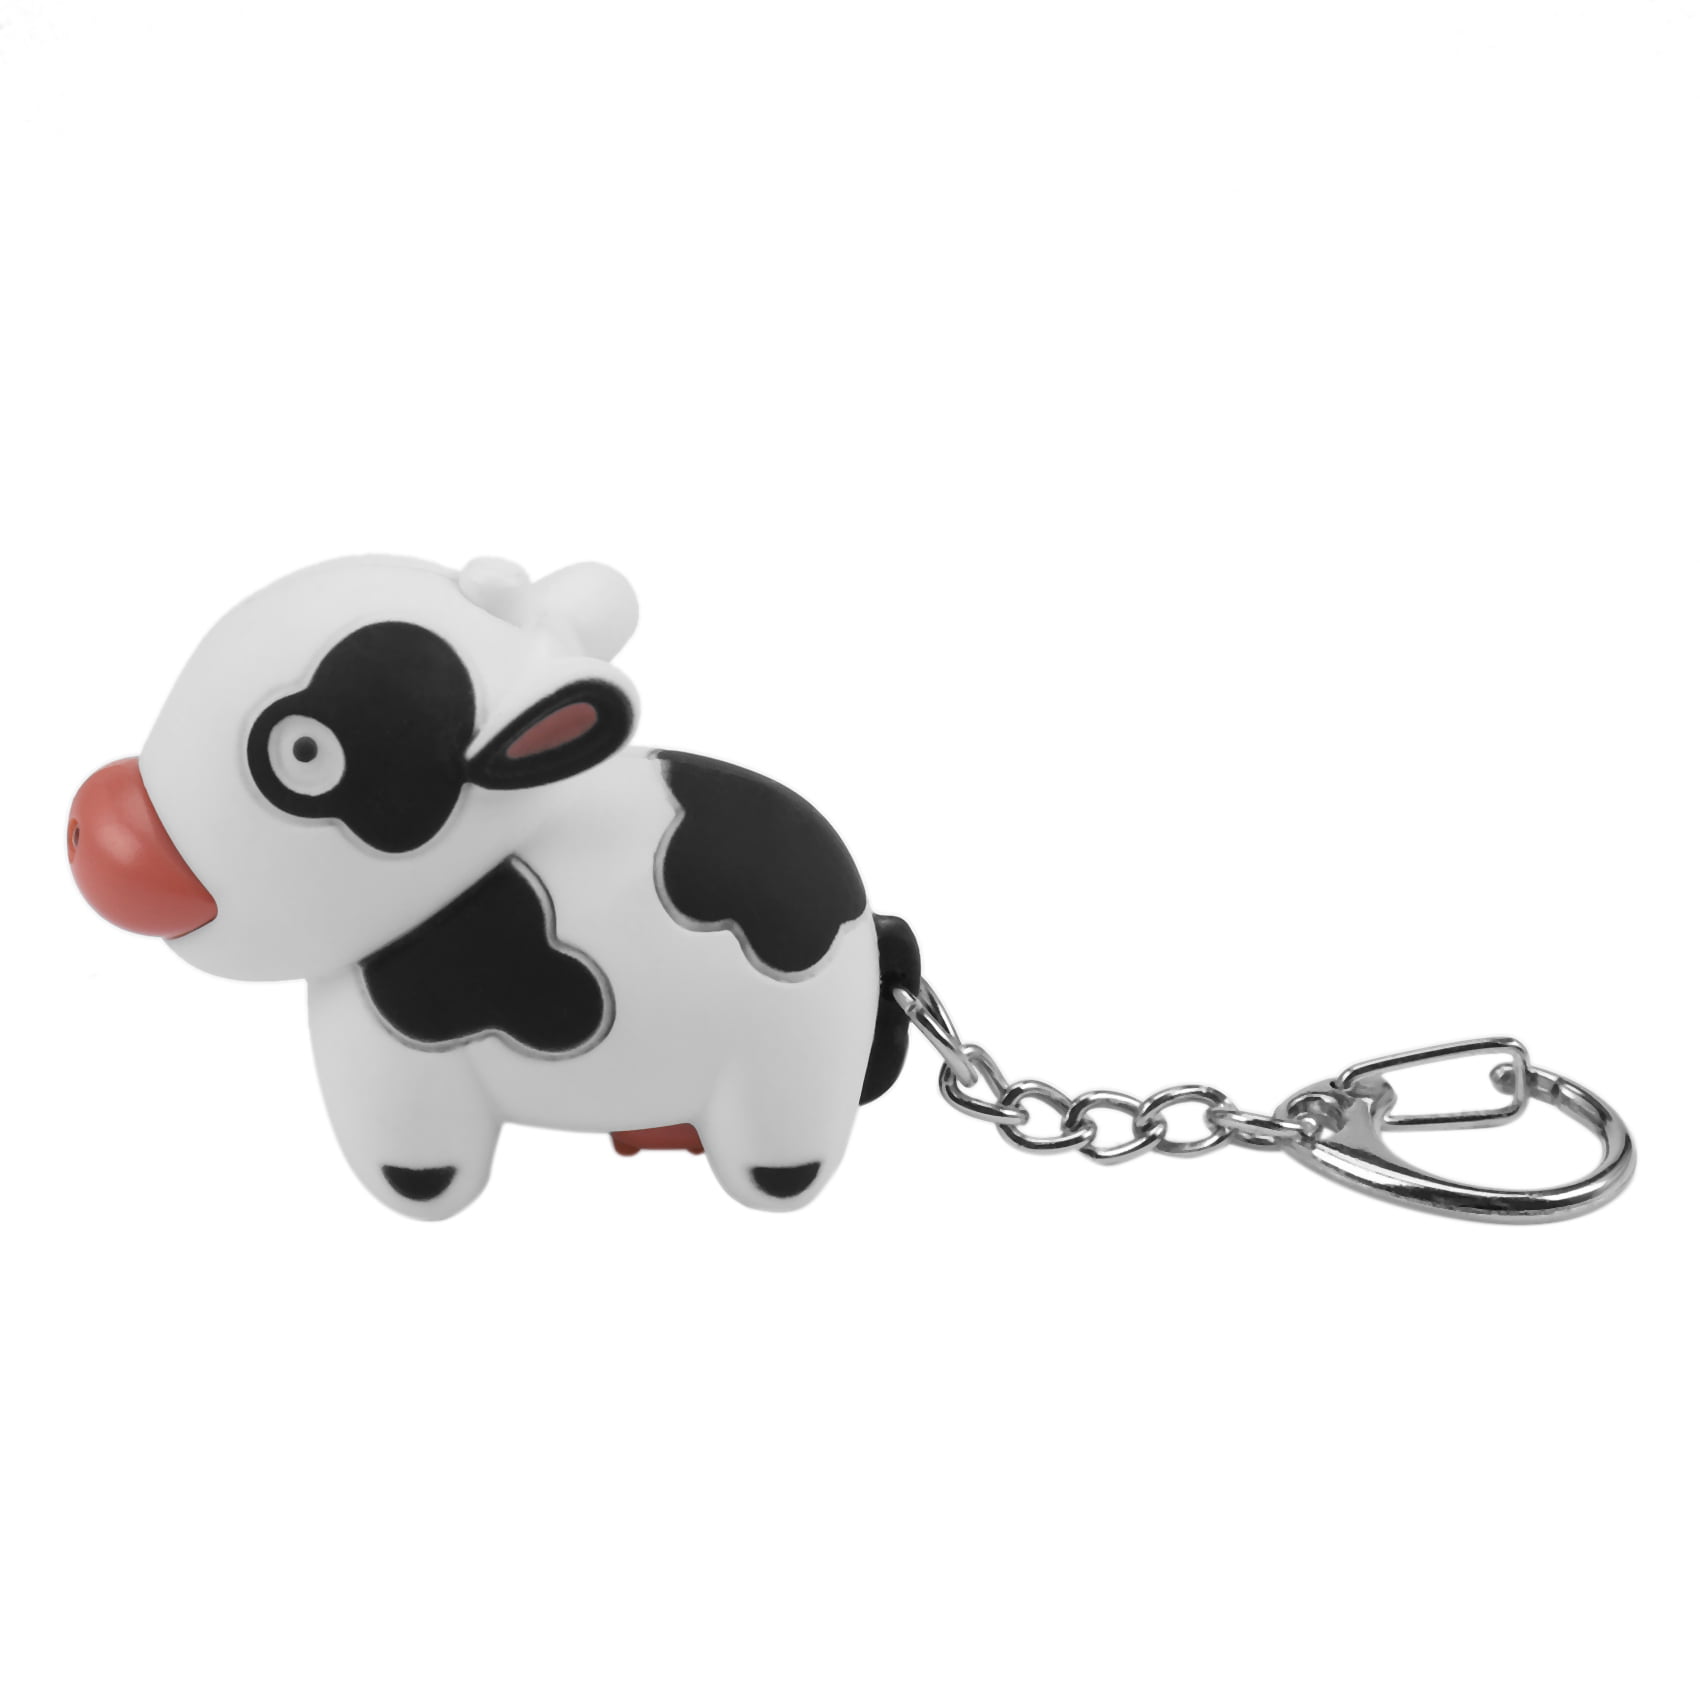 Mini Little Cow Animal Funny LED Keychain with Sound Key Holder Torch Flashlight